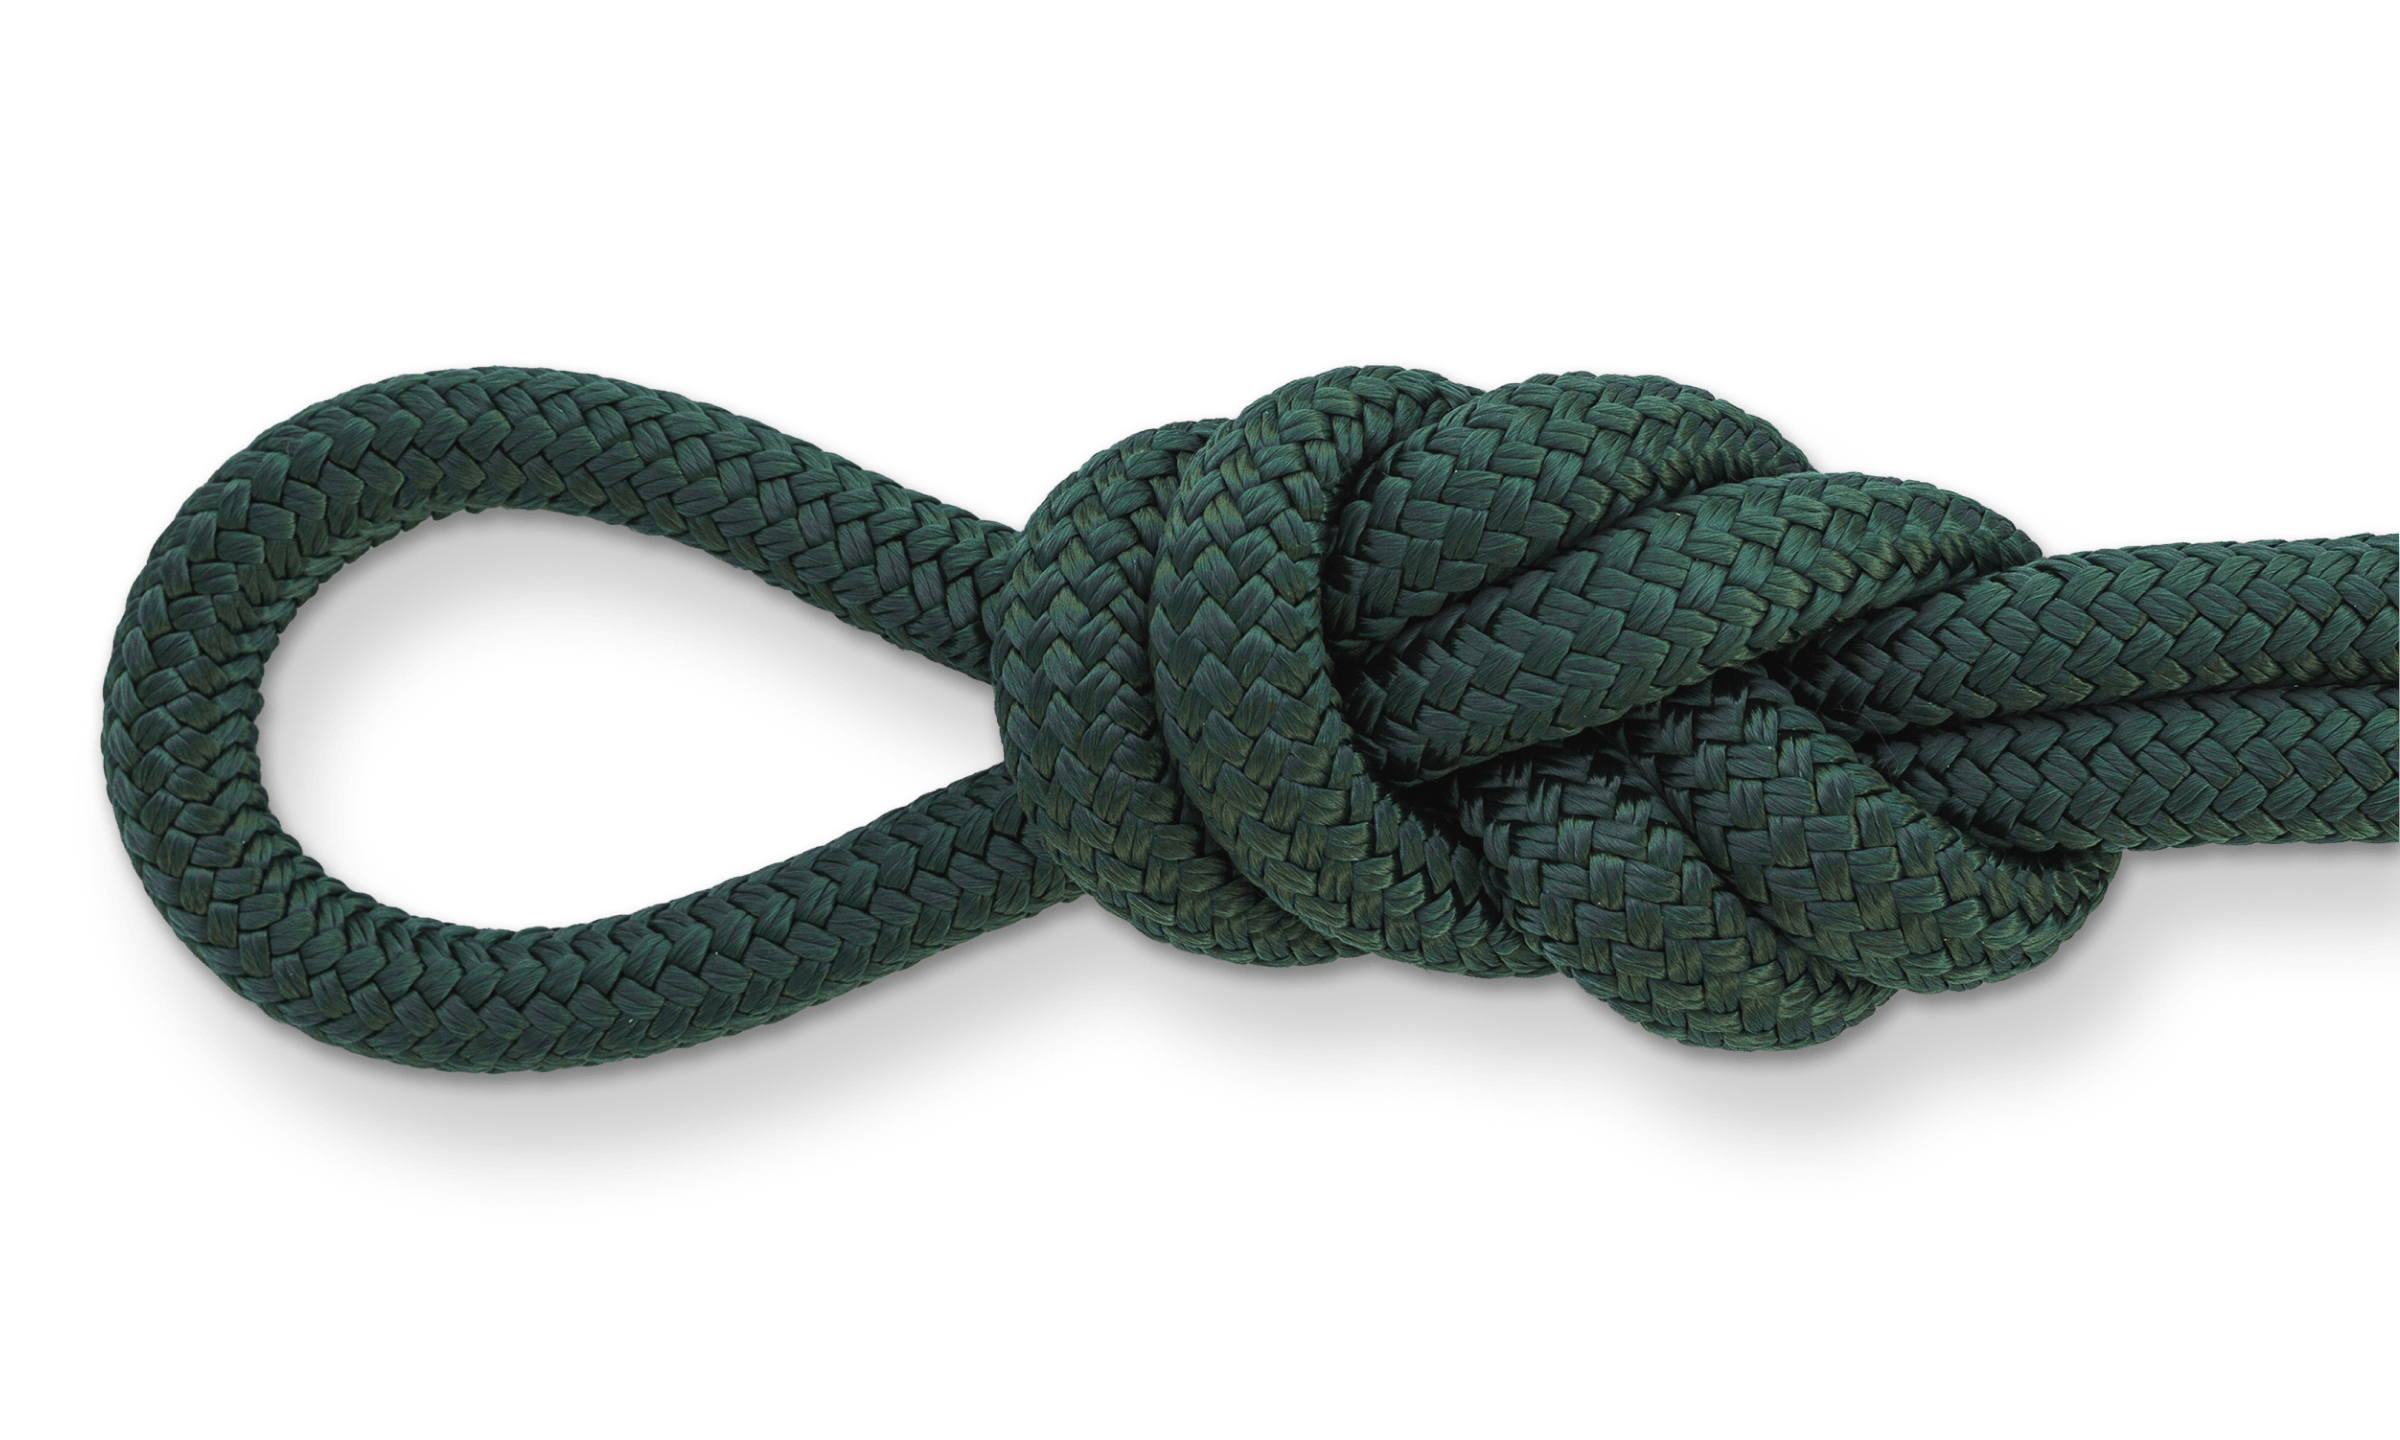 Quality Nylon Rope 1/4 inch Black Dacron Polyester Rope - 500 Foot